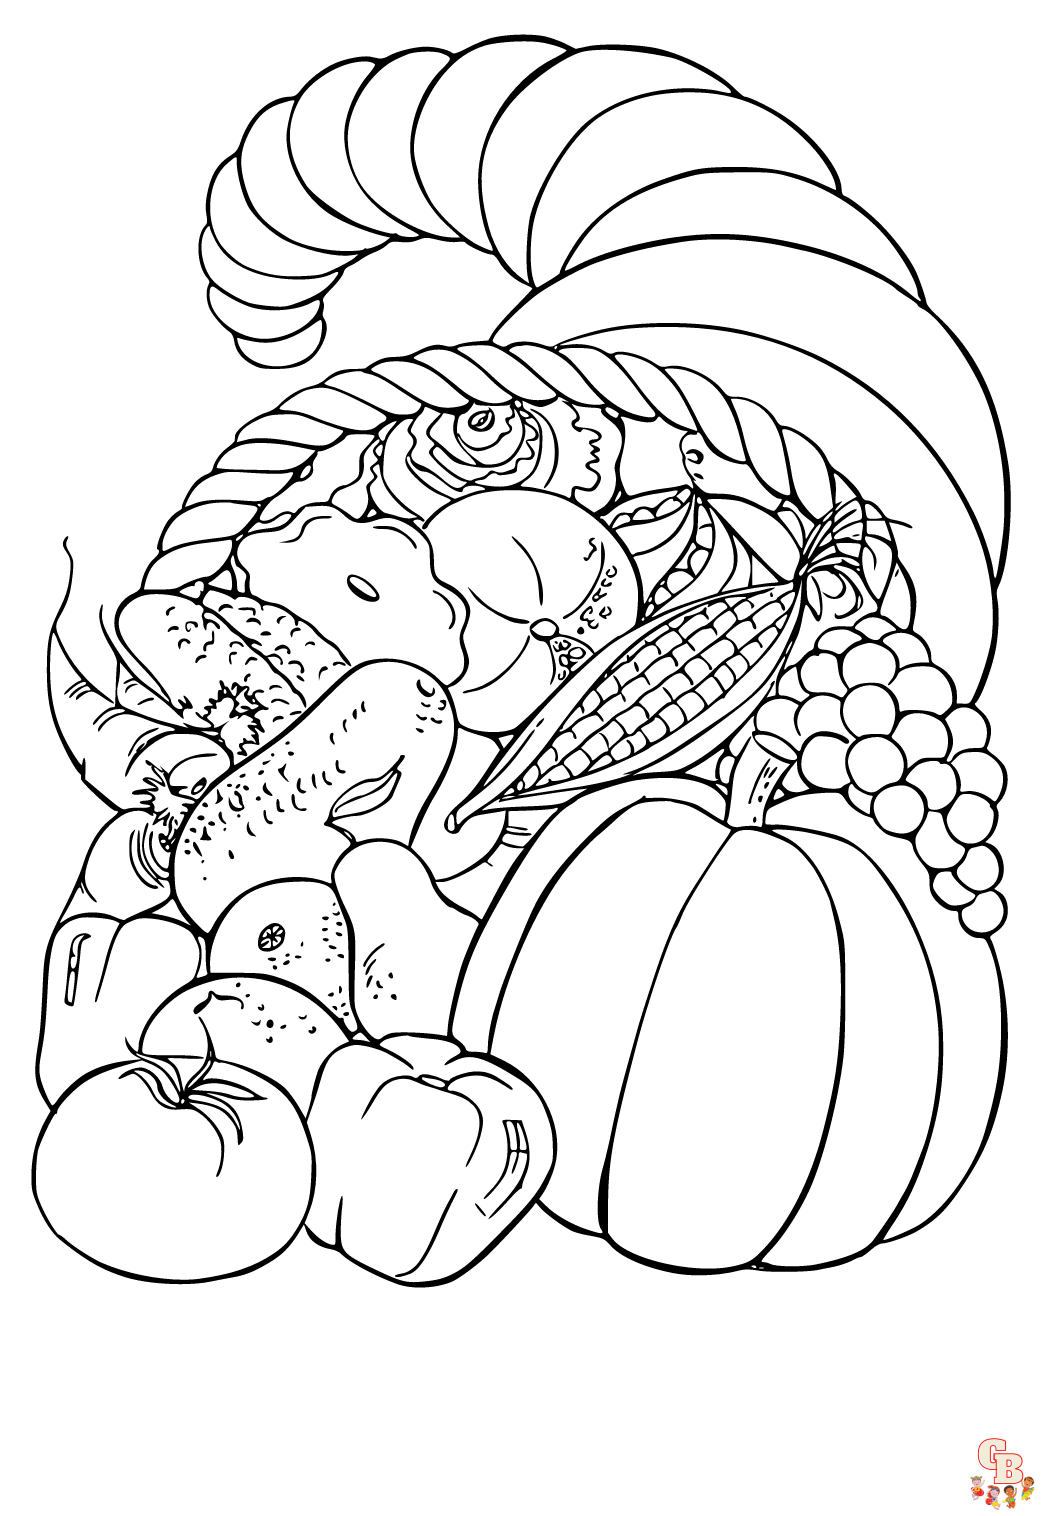 Harvest Coloring Pages 1